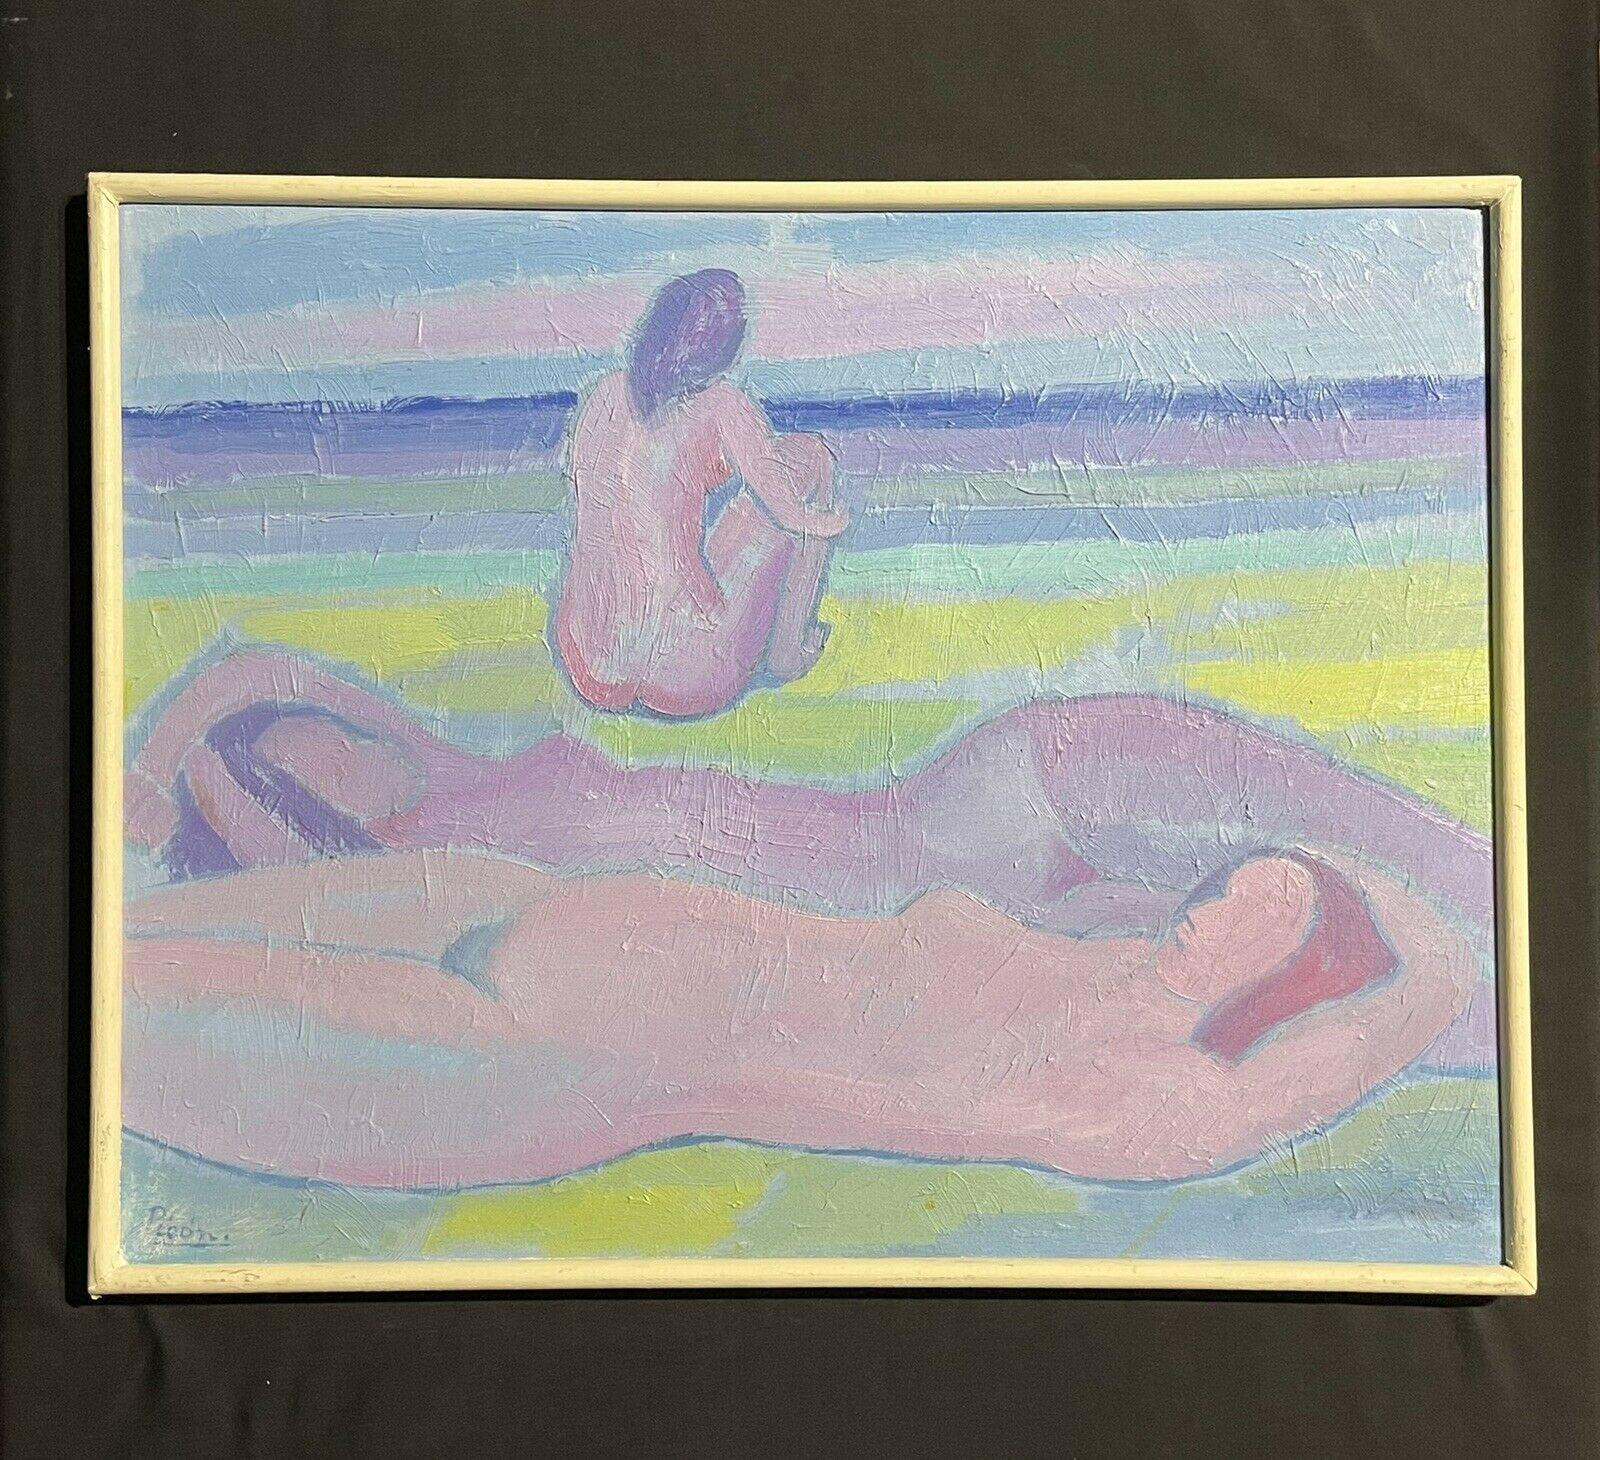 FRANCISCO PICON (1934-2016) SIGNED LARGE SYMBOLIST OIL - NUDES SUNBATHING BEACH - Painting by Francisco Picon